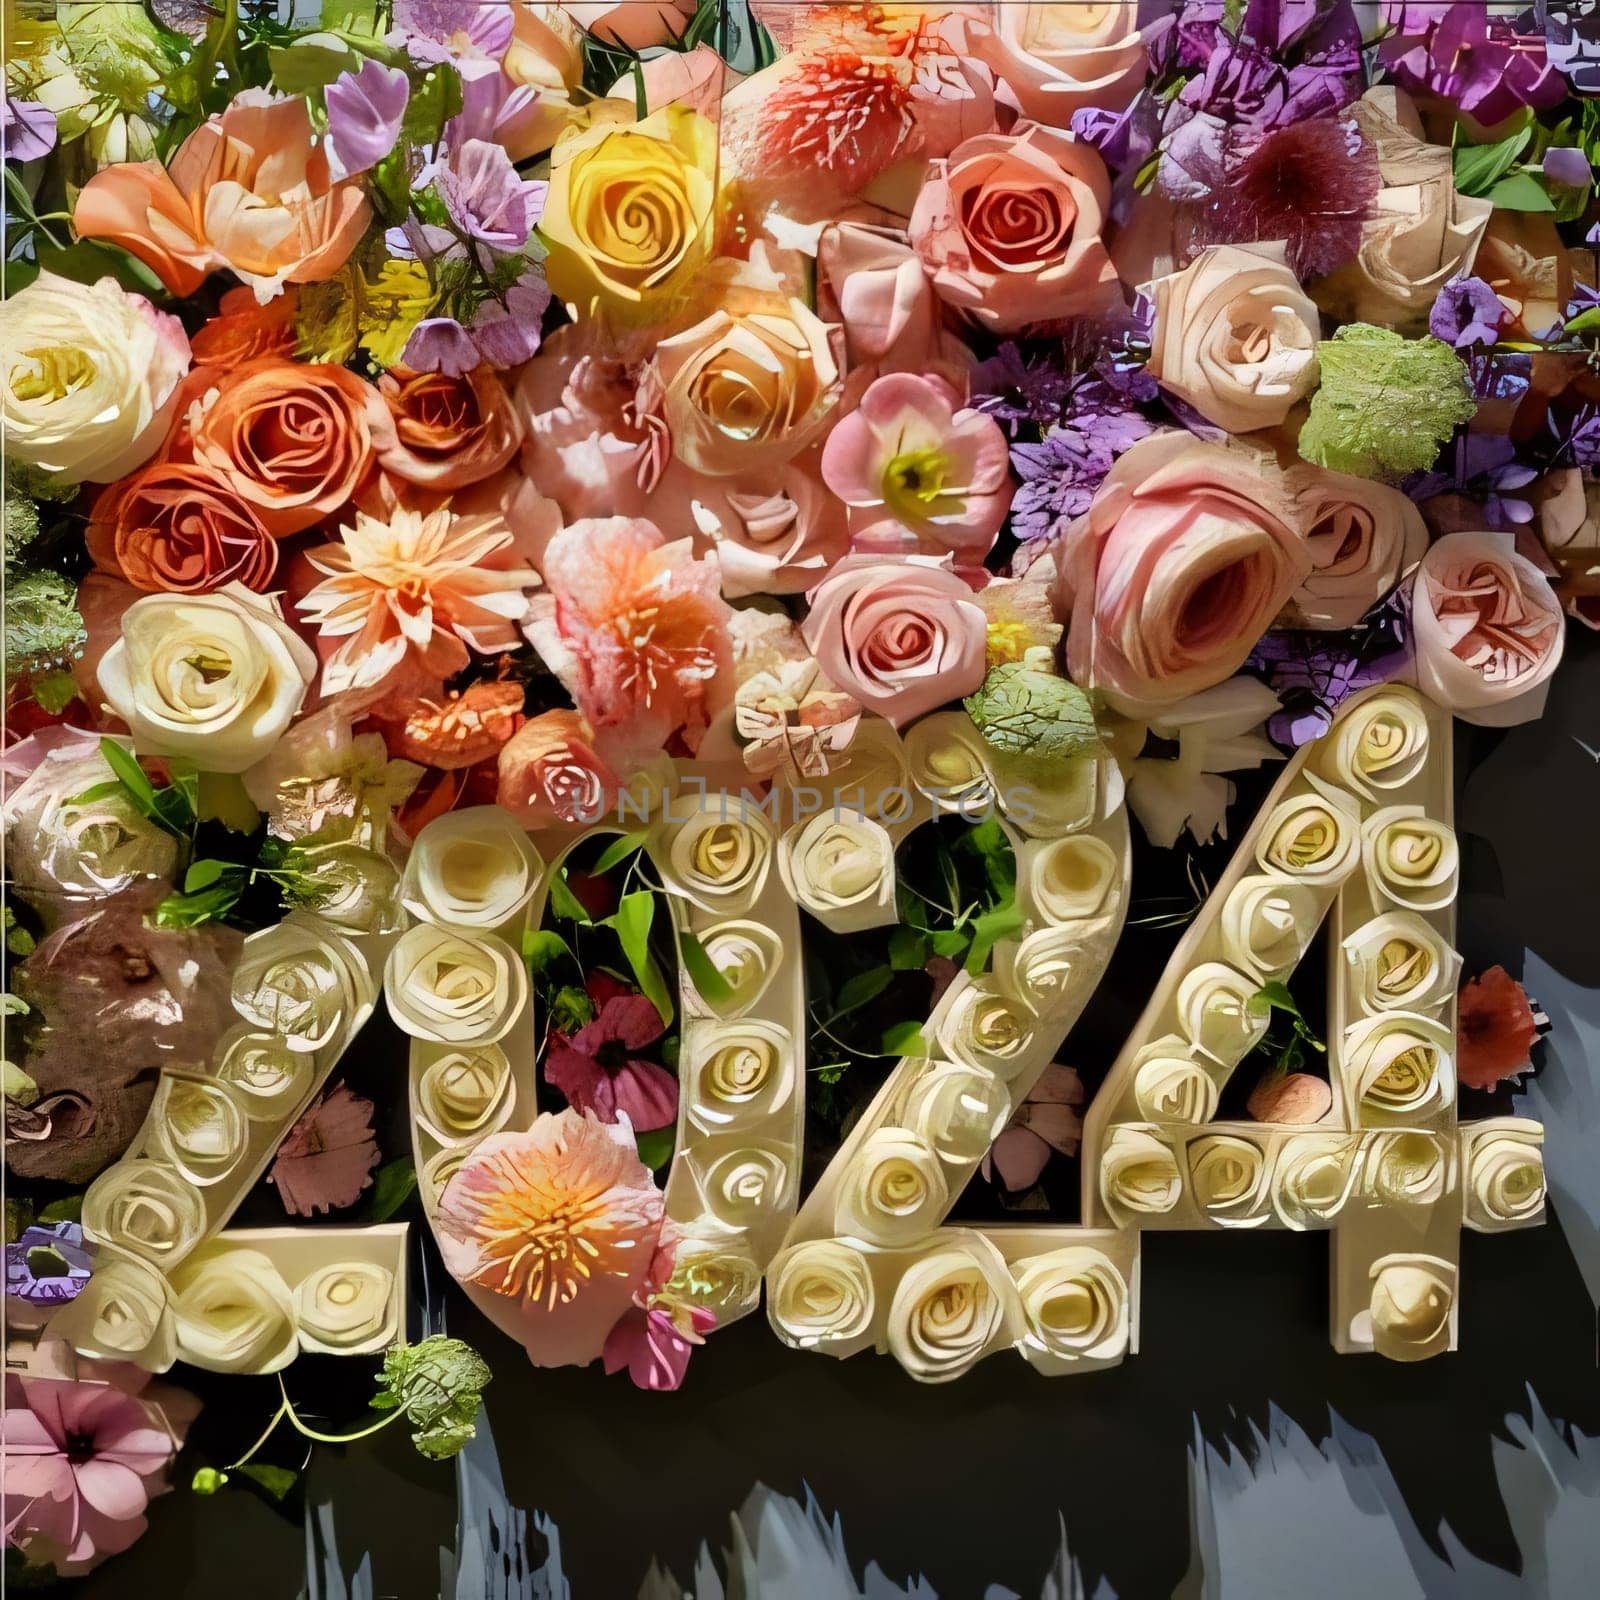 Inscription 2024 arranged with white flowers, at the top colorful flowers, bouquets. Flowering flowers, a symbol of spring, new life. A joyful time of nature waking up to life.